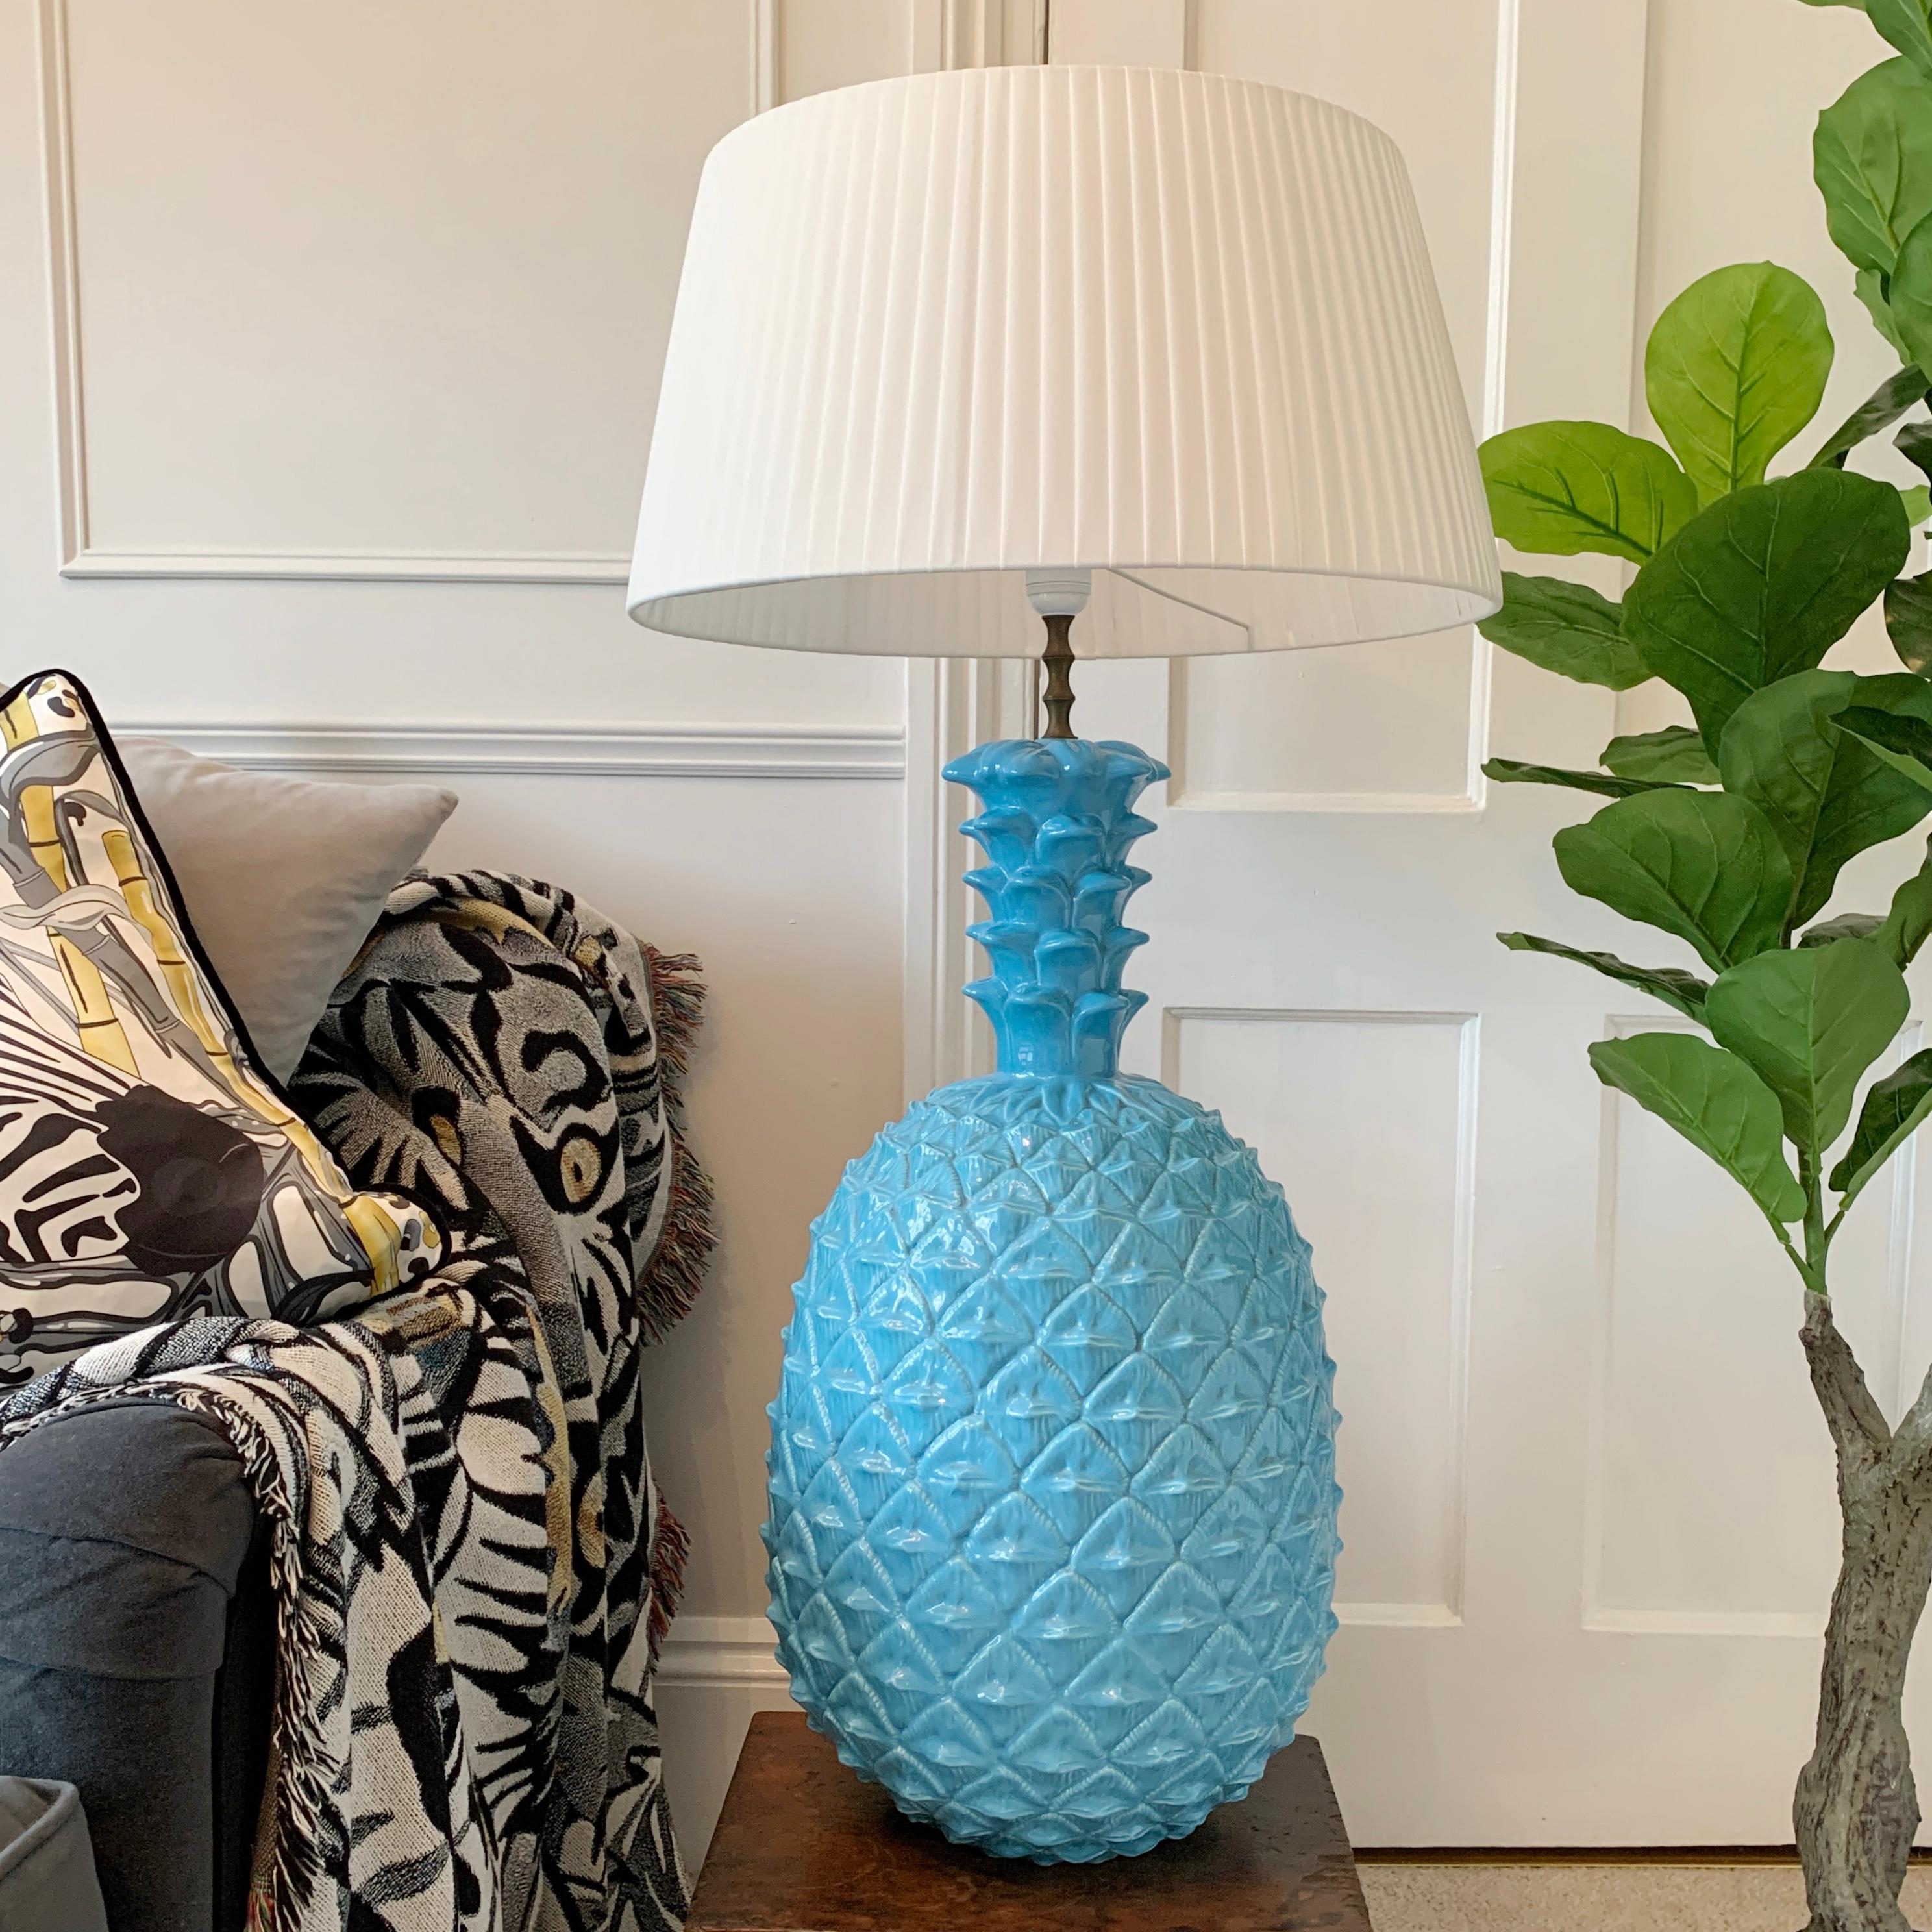 An extraordinary Turquoise Italian ceramic lamp, of quite exceptional proportions. This incredible piece dates to the 1960's and is easily the largest ceramic lamp that we have ever stocked. There is a tiny tonal graze to an area of the glaze, but